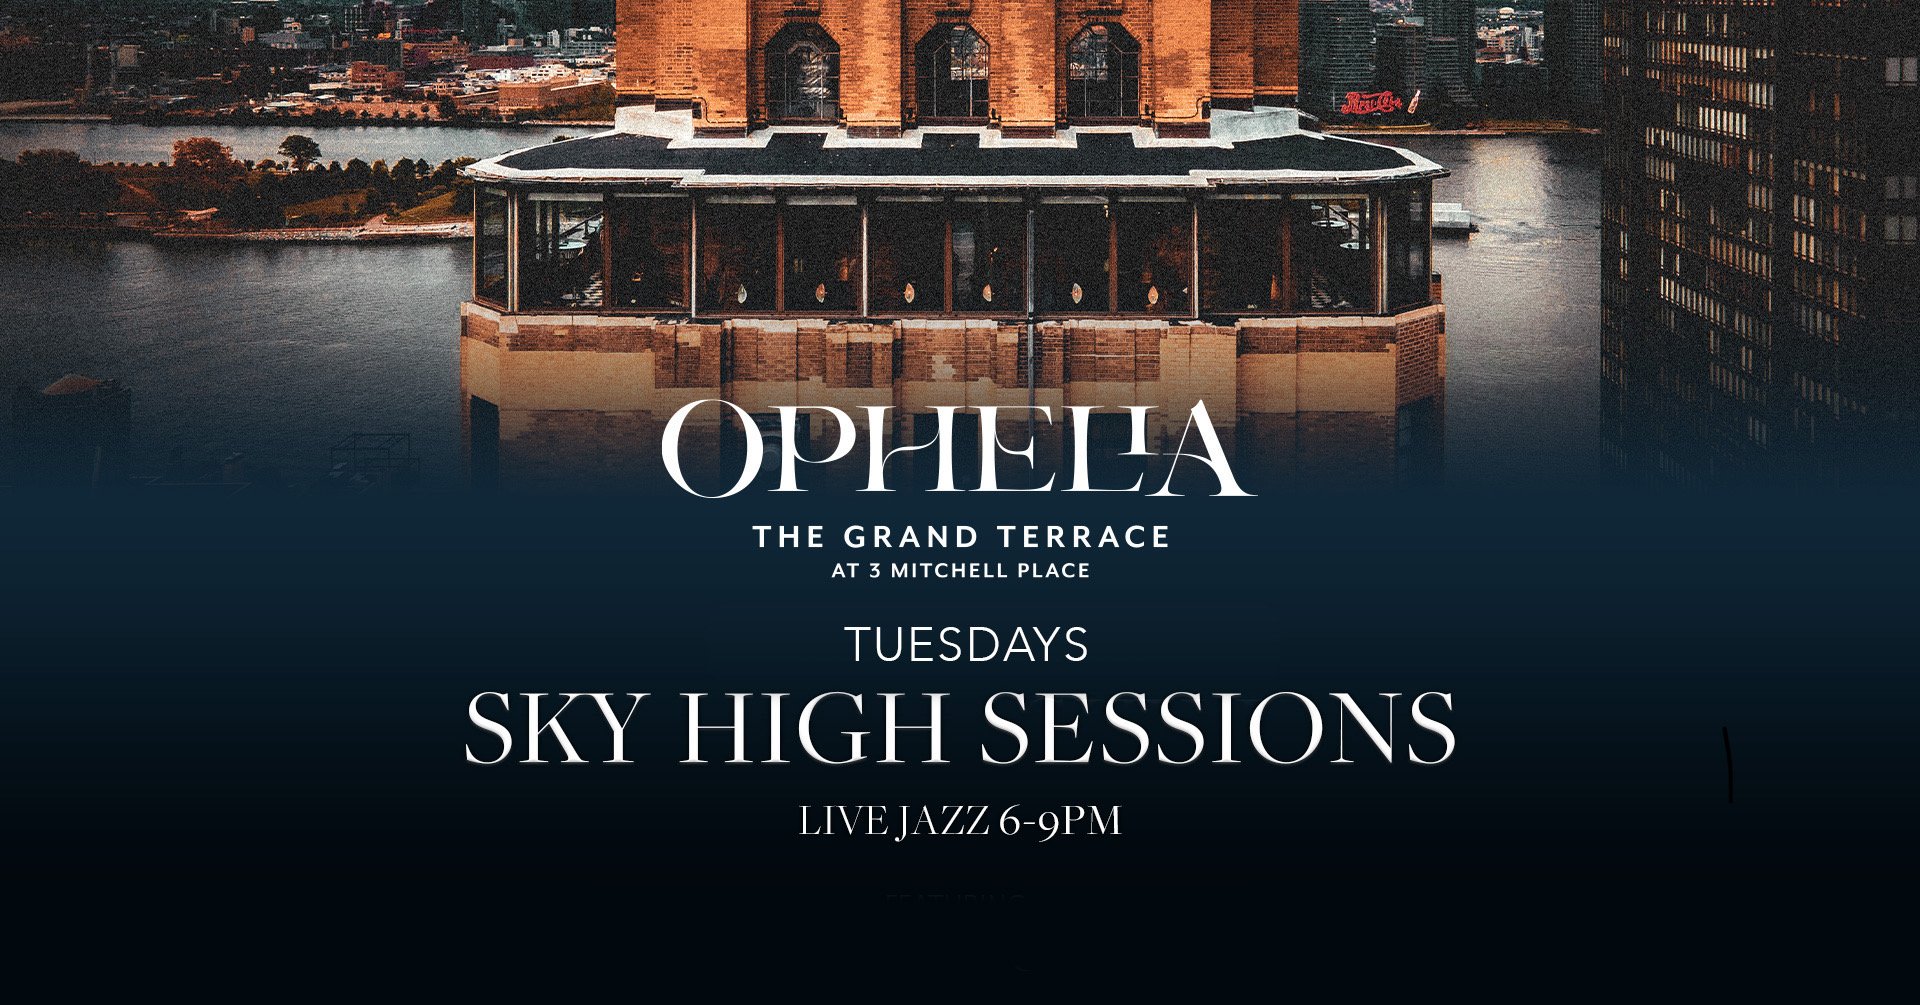 SKY HIGH SESSIONS at Ophelia